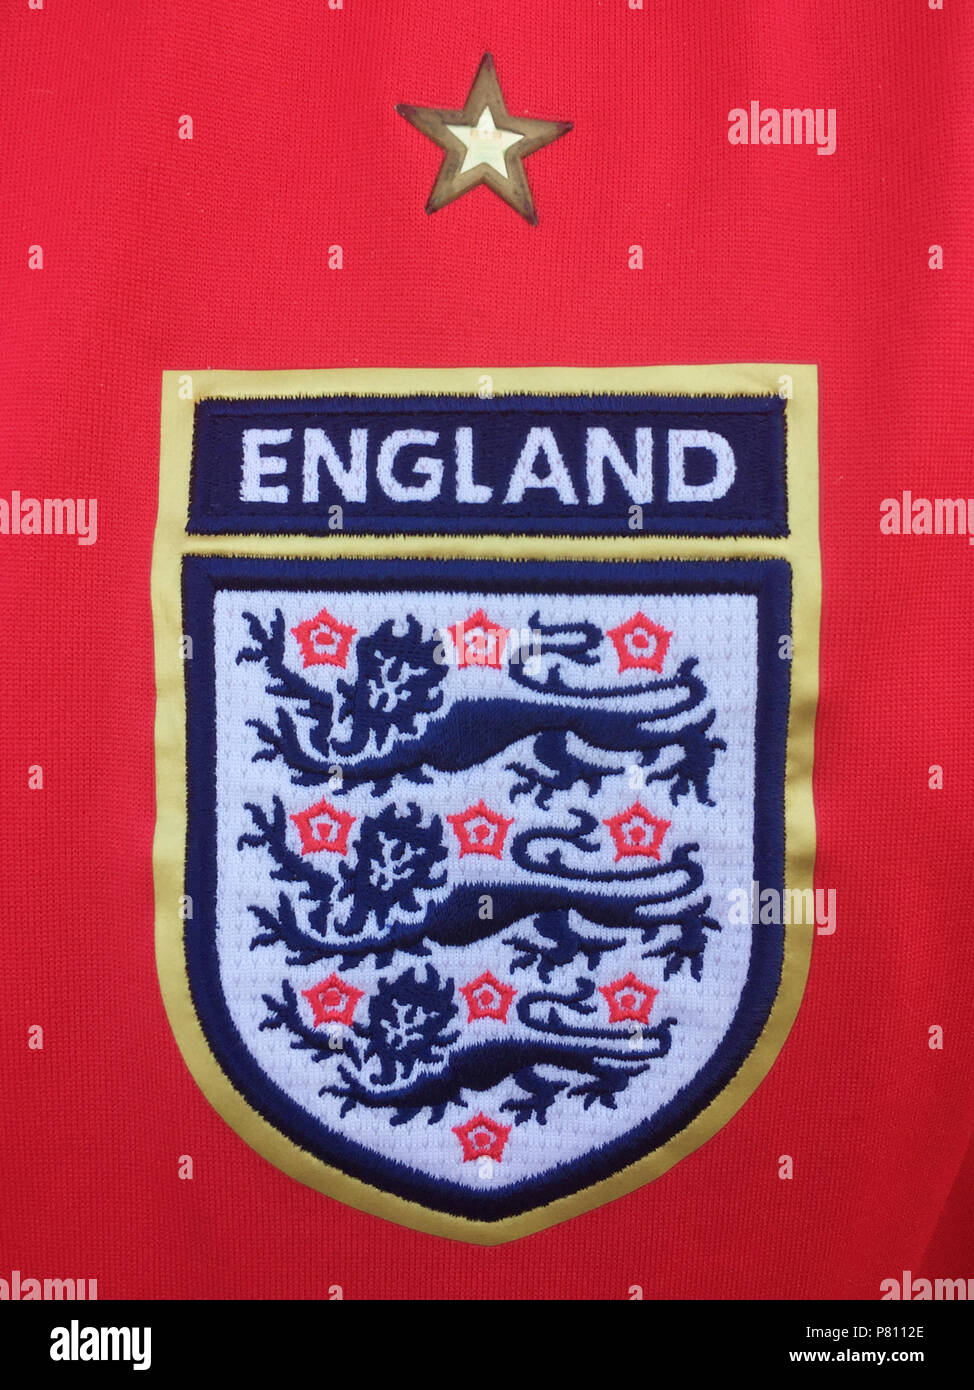 LONDON, UK - JULY 8th 2018: Red England national football shirt with the three lions emblem Stock Photo